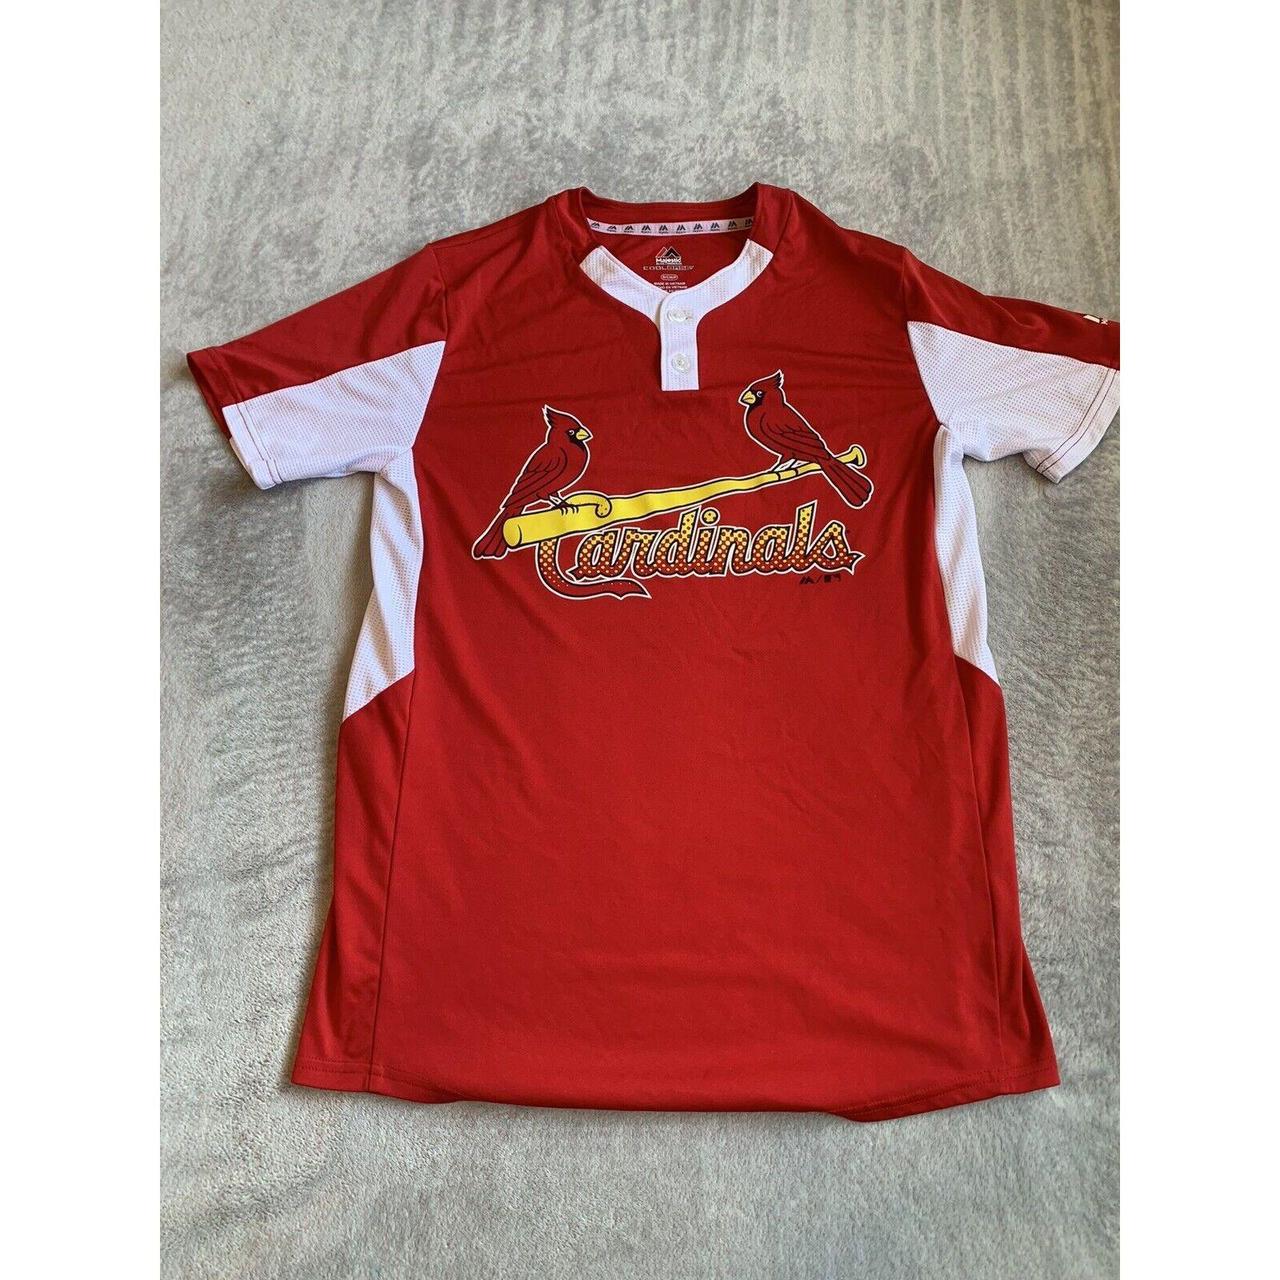 St. Louis Cardinals Sweater Mens Small Red MLB Baseball Majestic